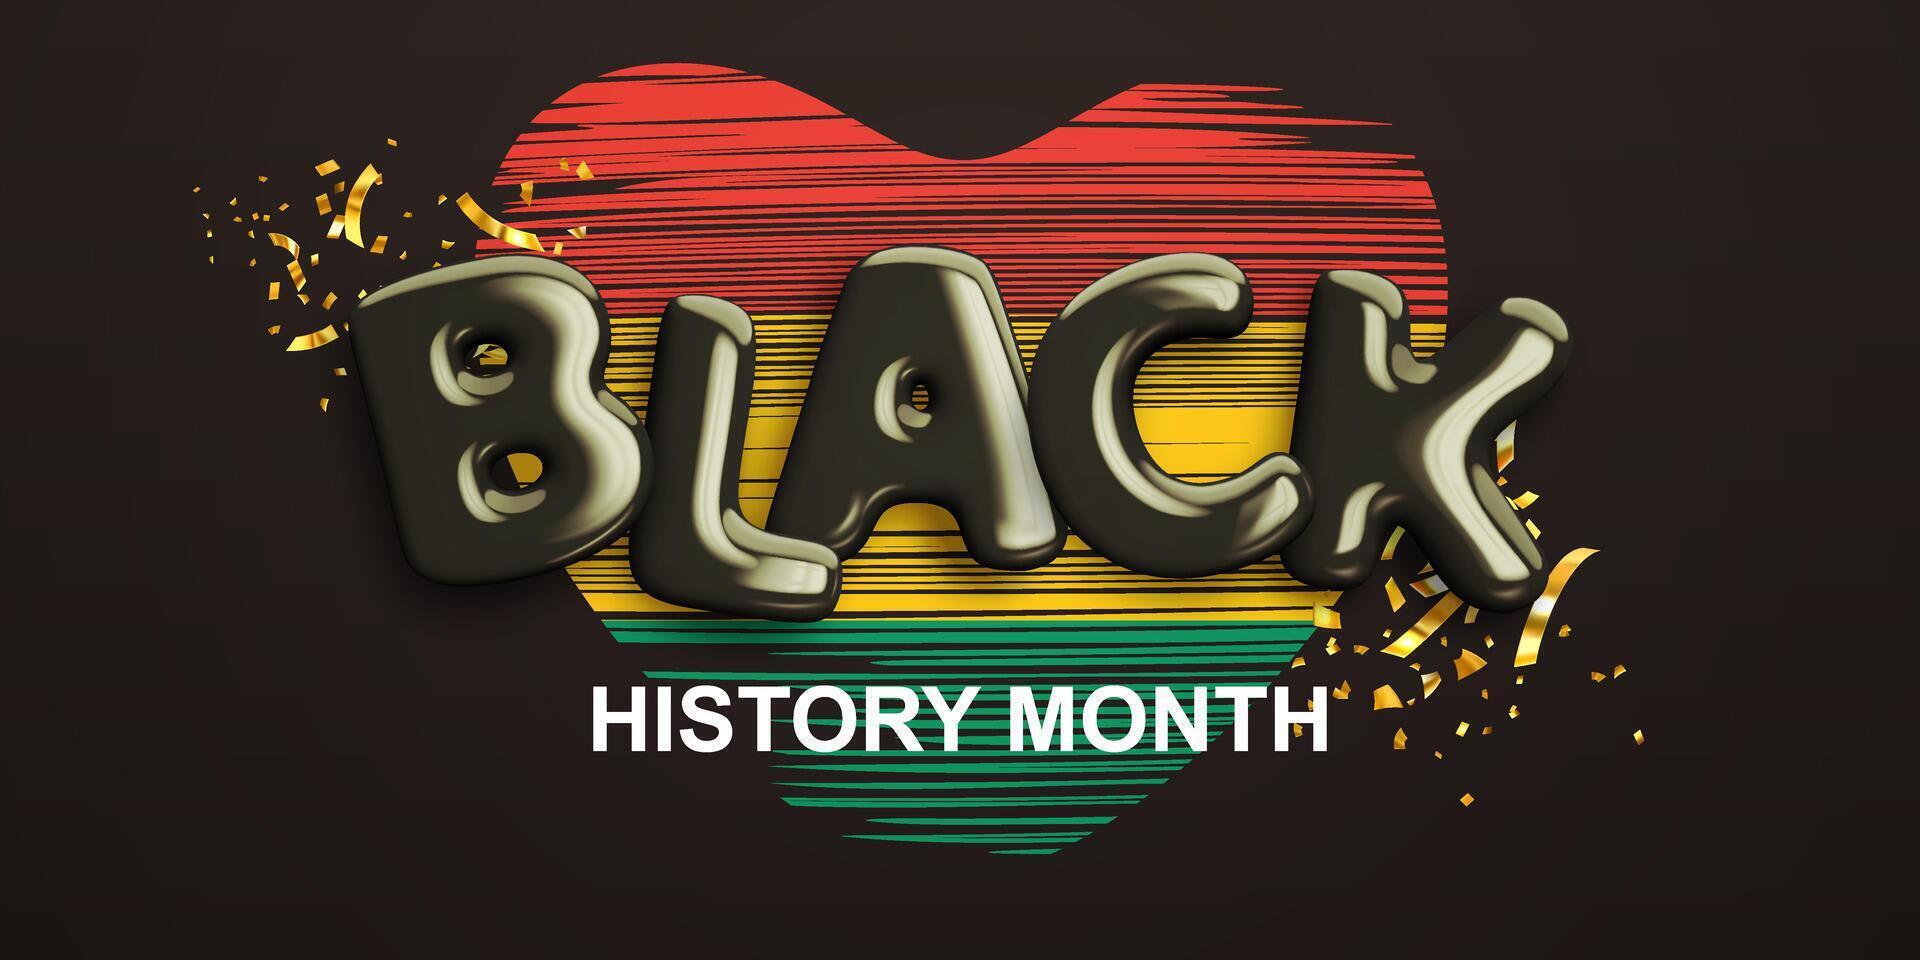 Black history month. Banner with realistic glossy 3d text against background of heart in red, yellow, green colors of Pan-African flag. African American heritage month celebration. Vector illustration